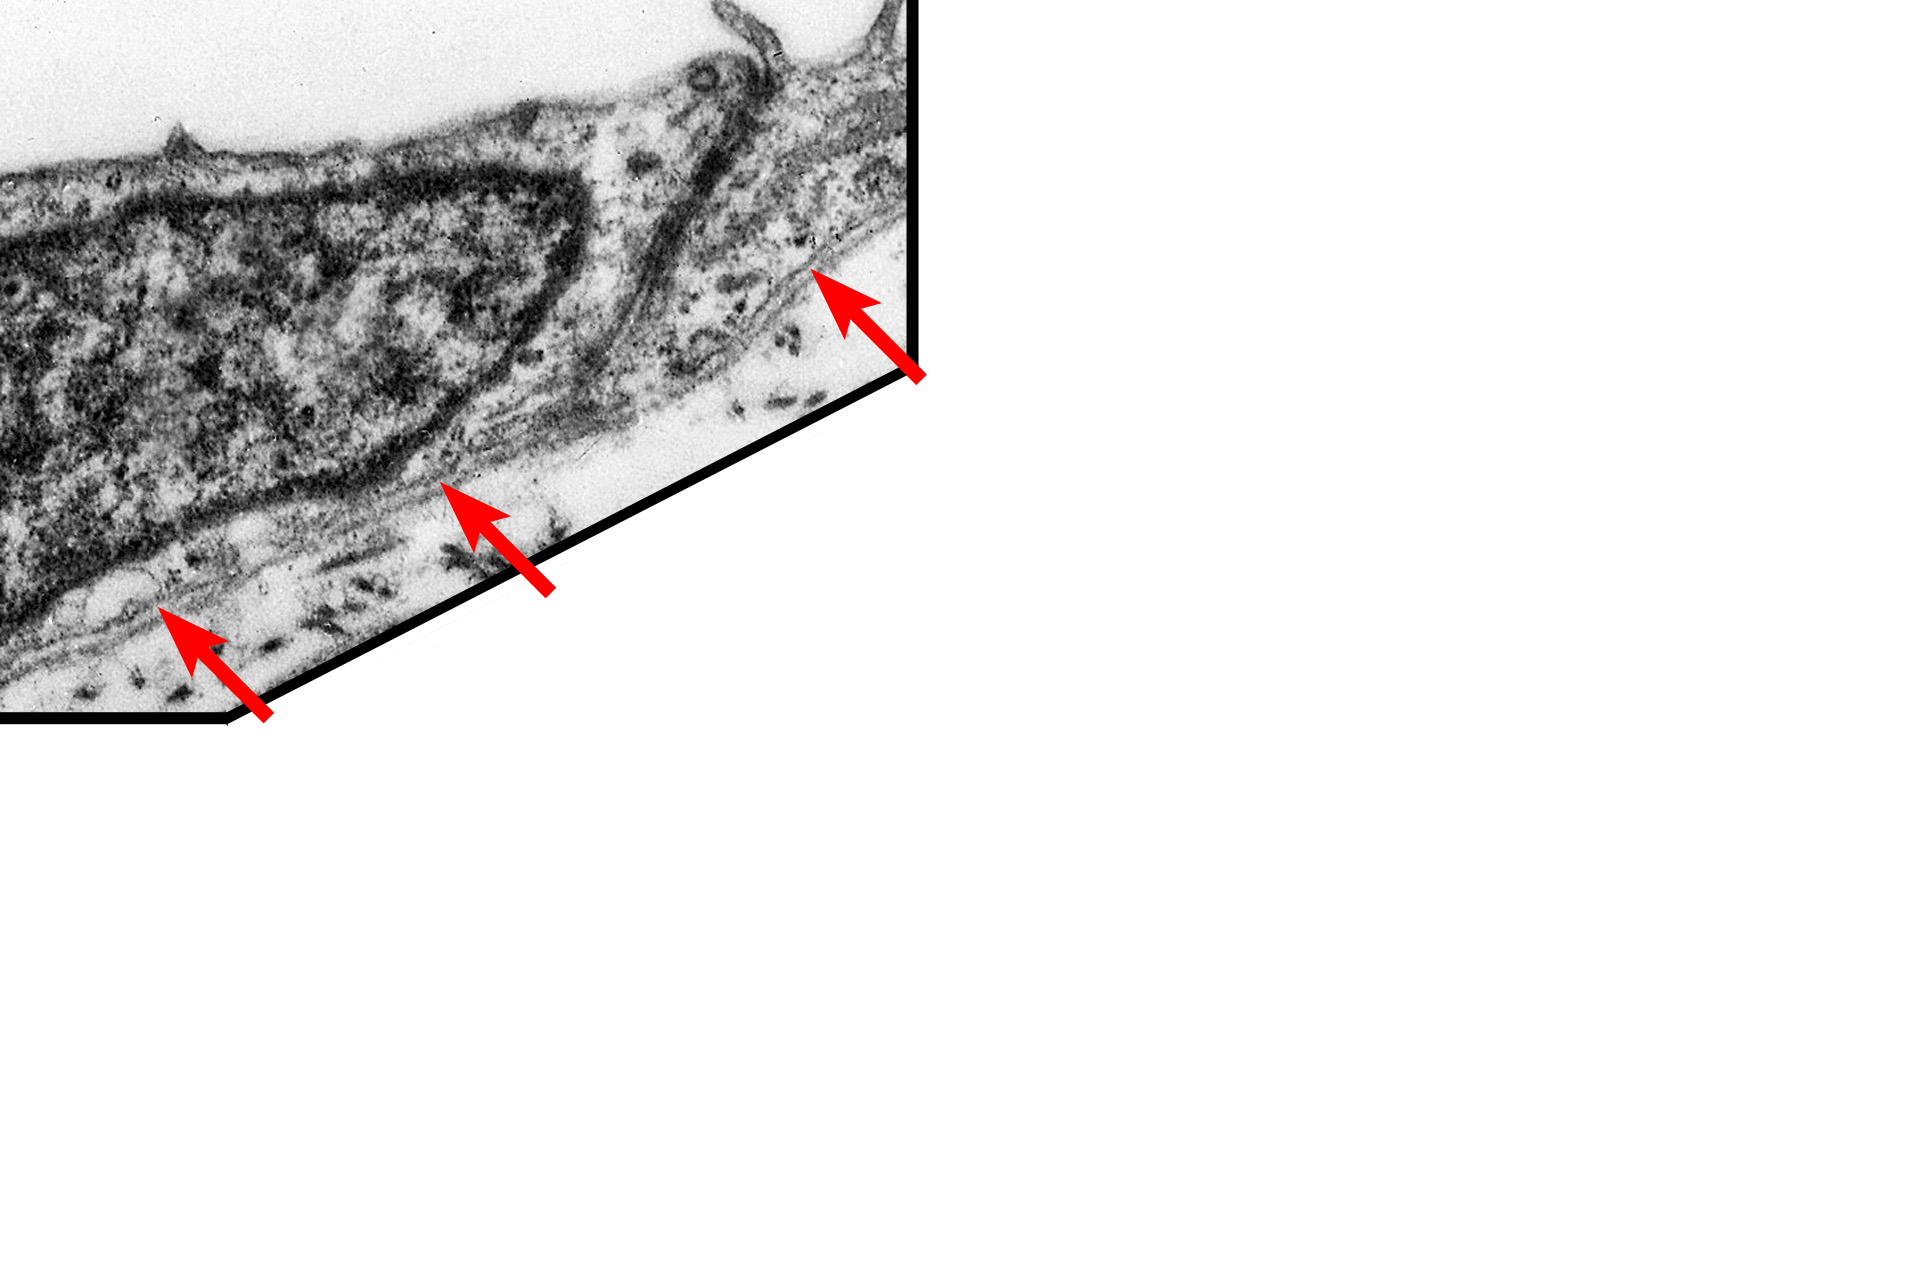 Lamina lucida <p>All epithelia rest on a basement membrane, which consists of two components, the basal lamina, secreted by epithelial cells, and a reticular lamina, secreted by fibroblasts in the underlying connective tissue.  The basal lamina is, in turn, subdivided into lamina lucida and lamina densa.  Serosa  15,000x</p>
